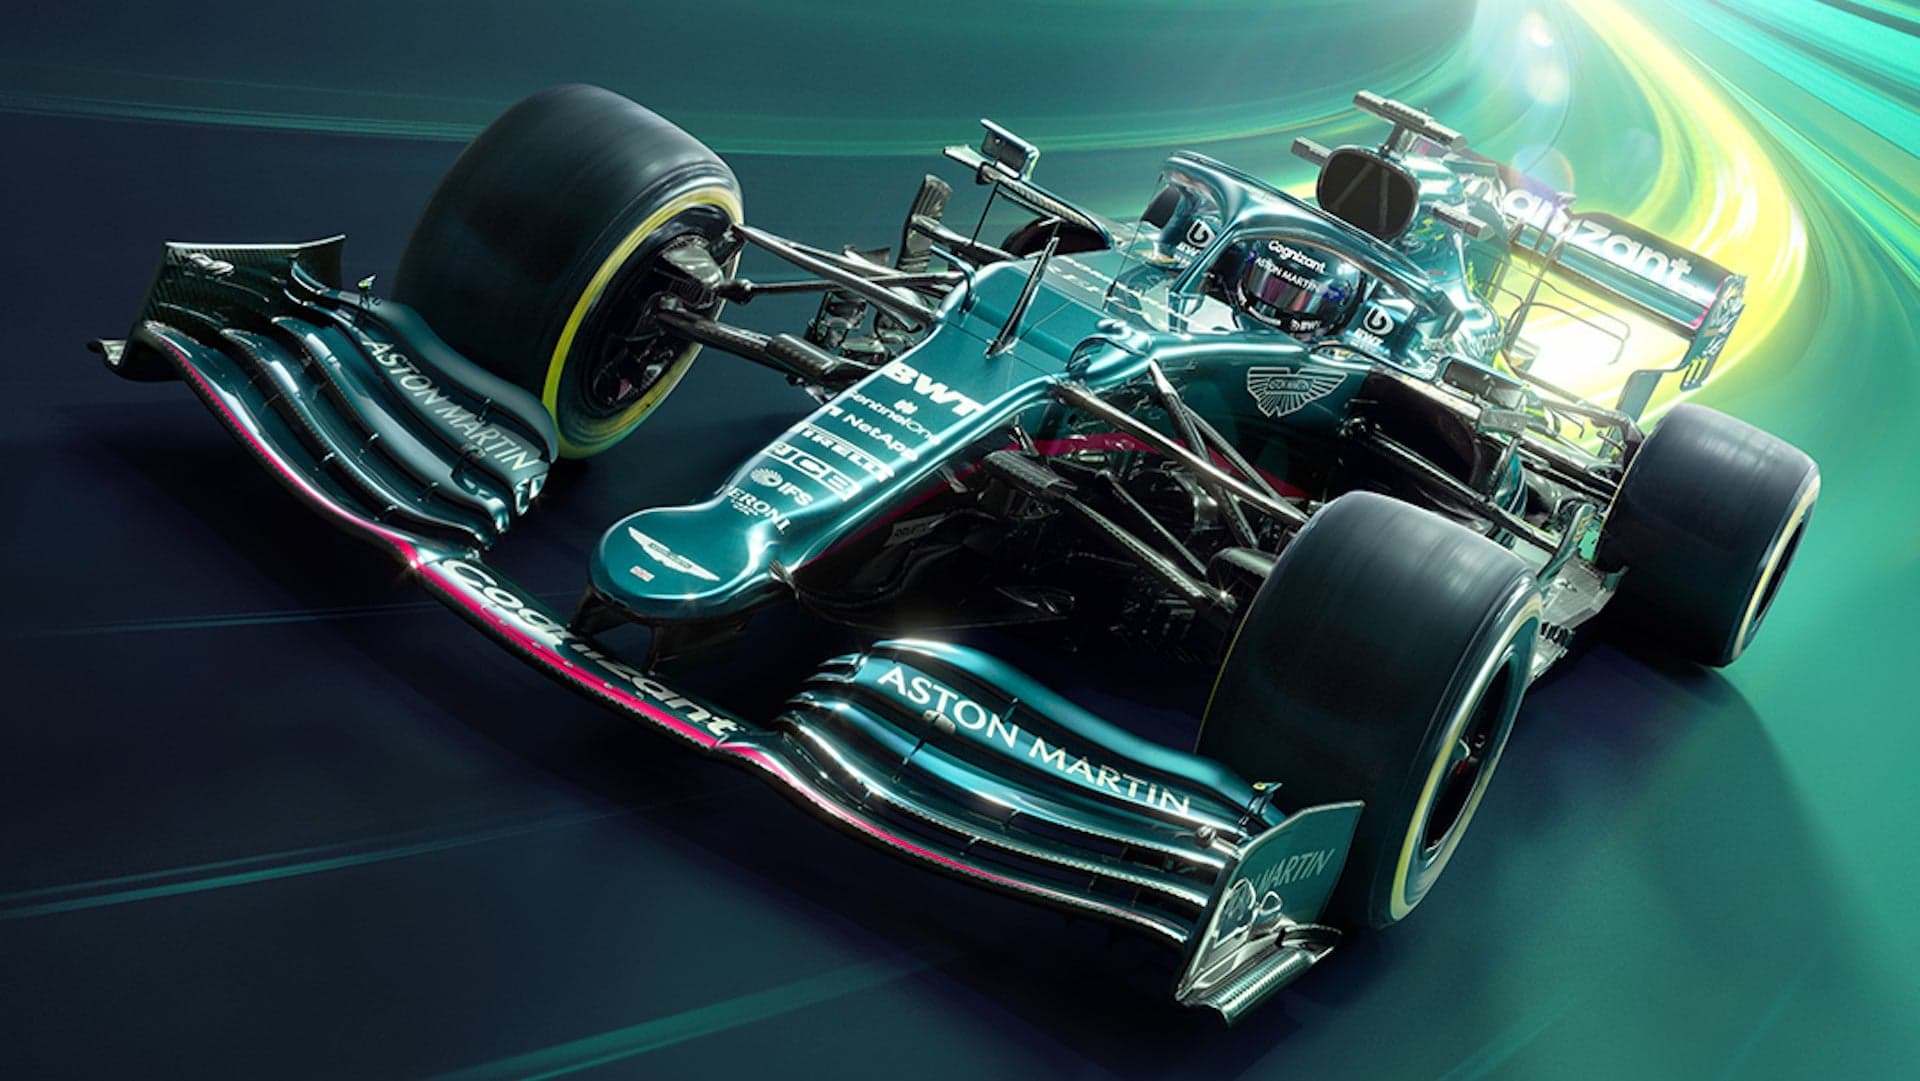 This May Be the Aston Martin F1 Car’s Handsomely Green Livery